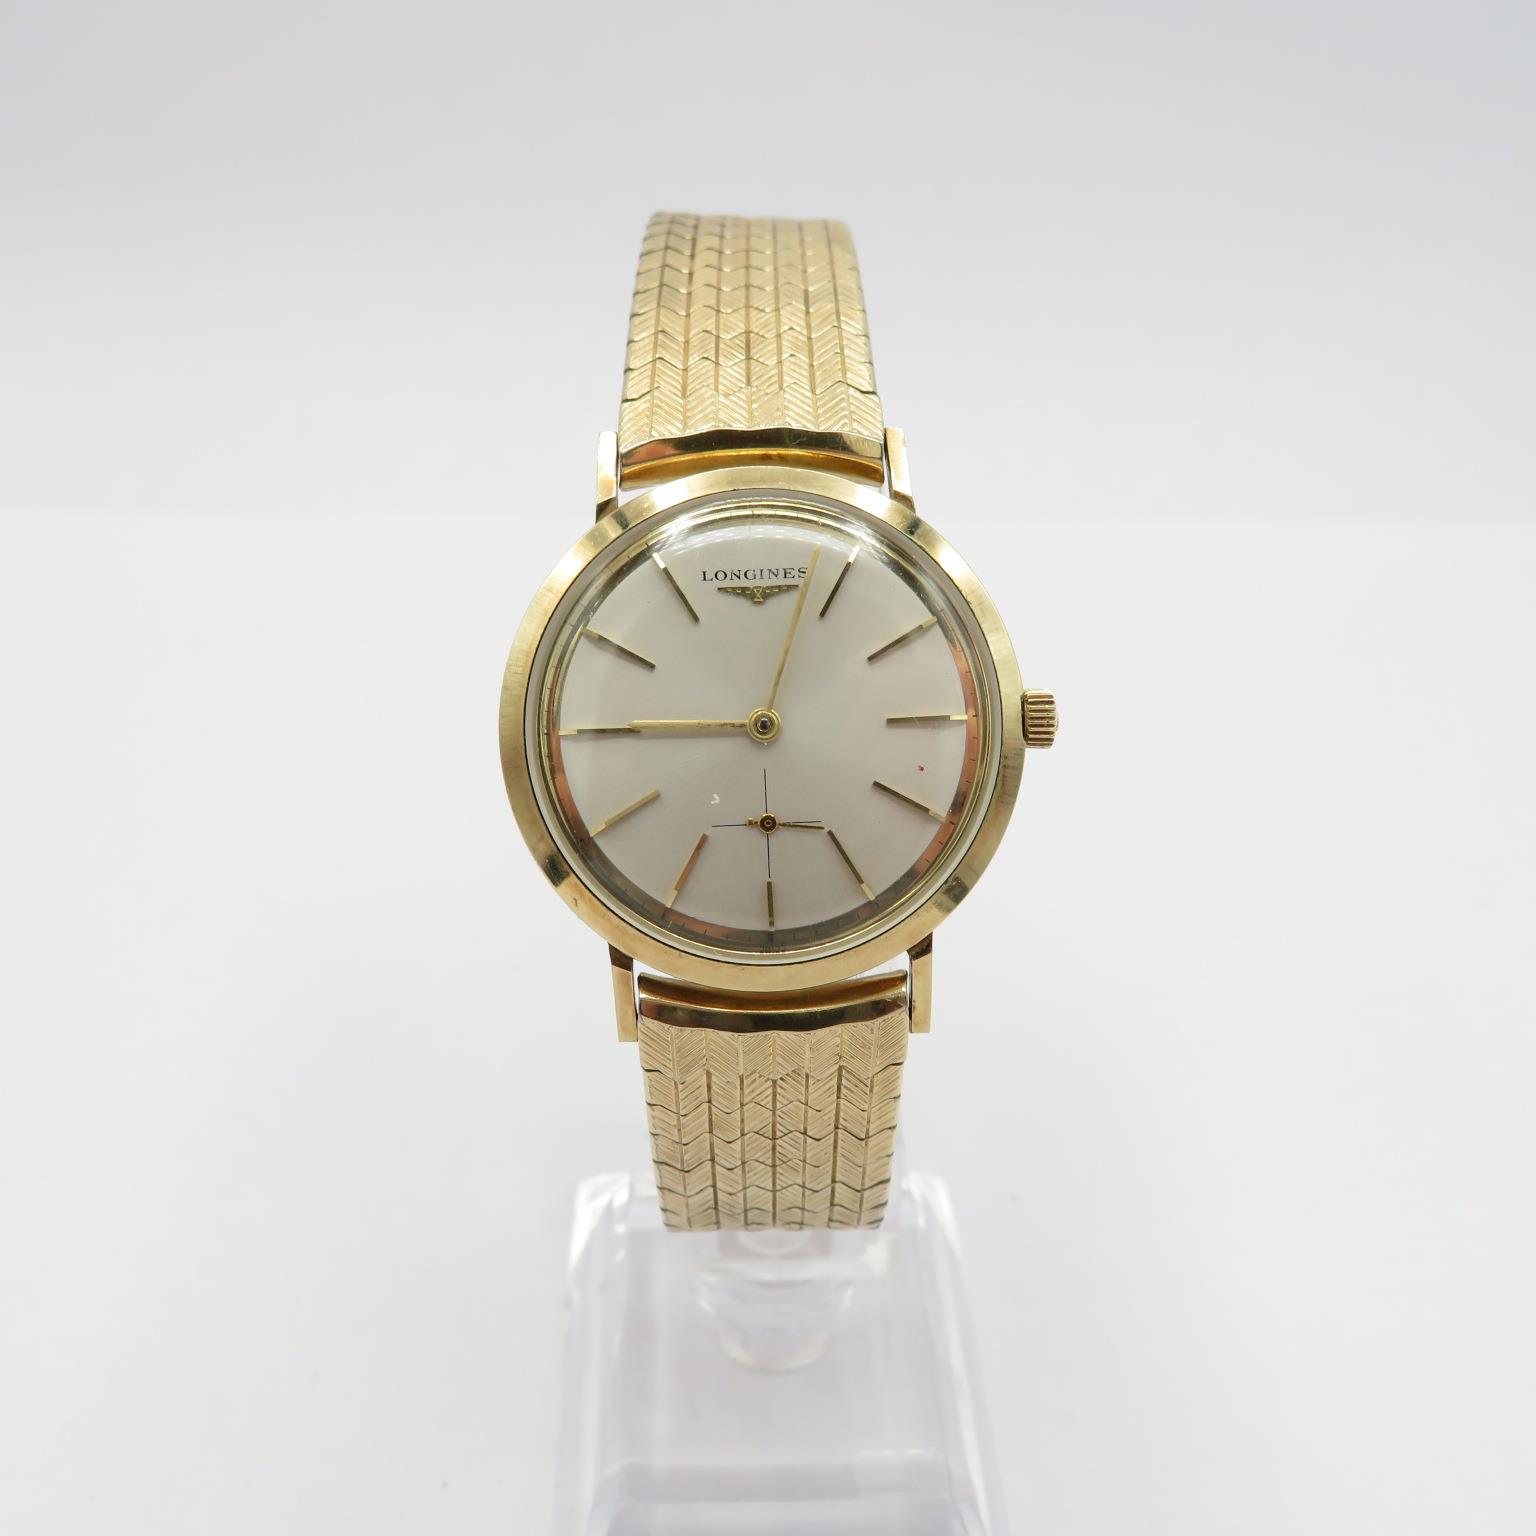 Longines 10 ct gold filled ref 1200 gents vintage gold filled wristwatch handwind working flying